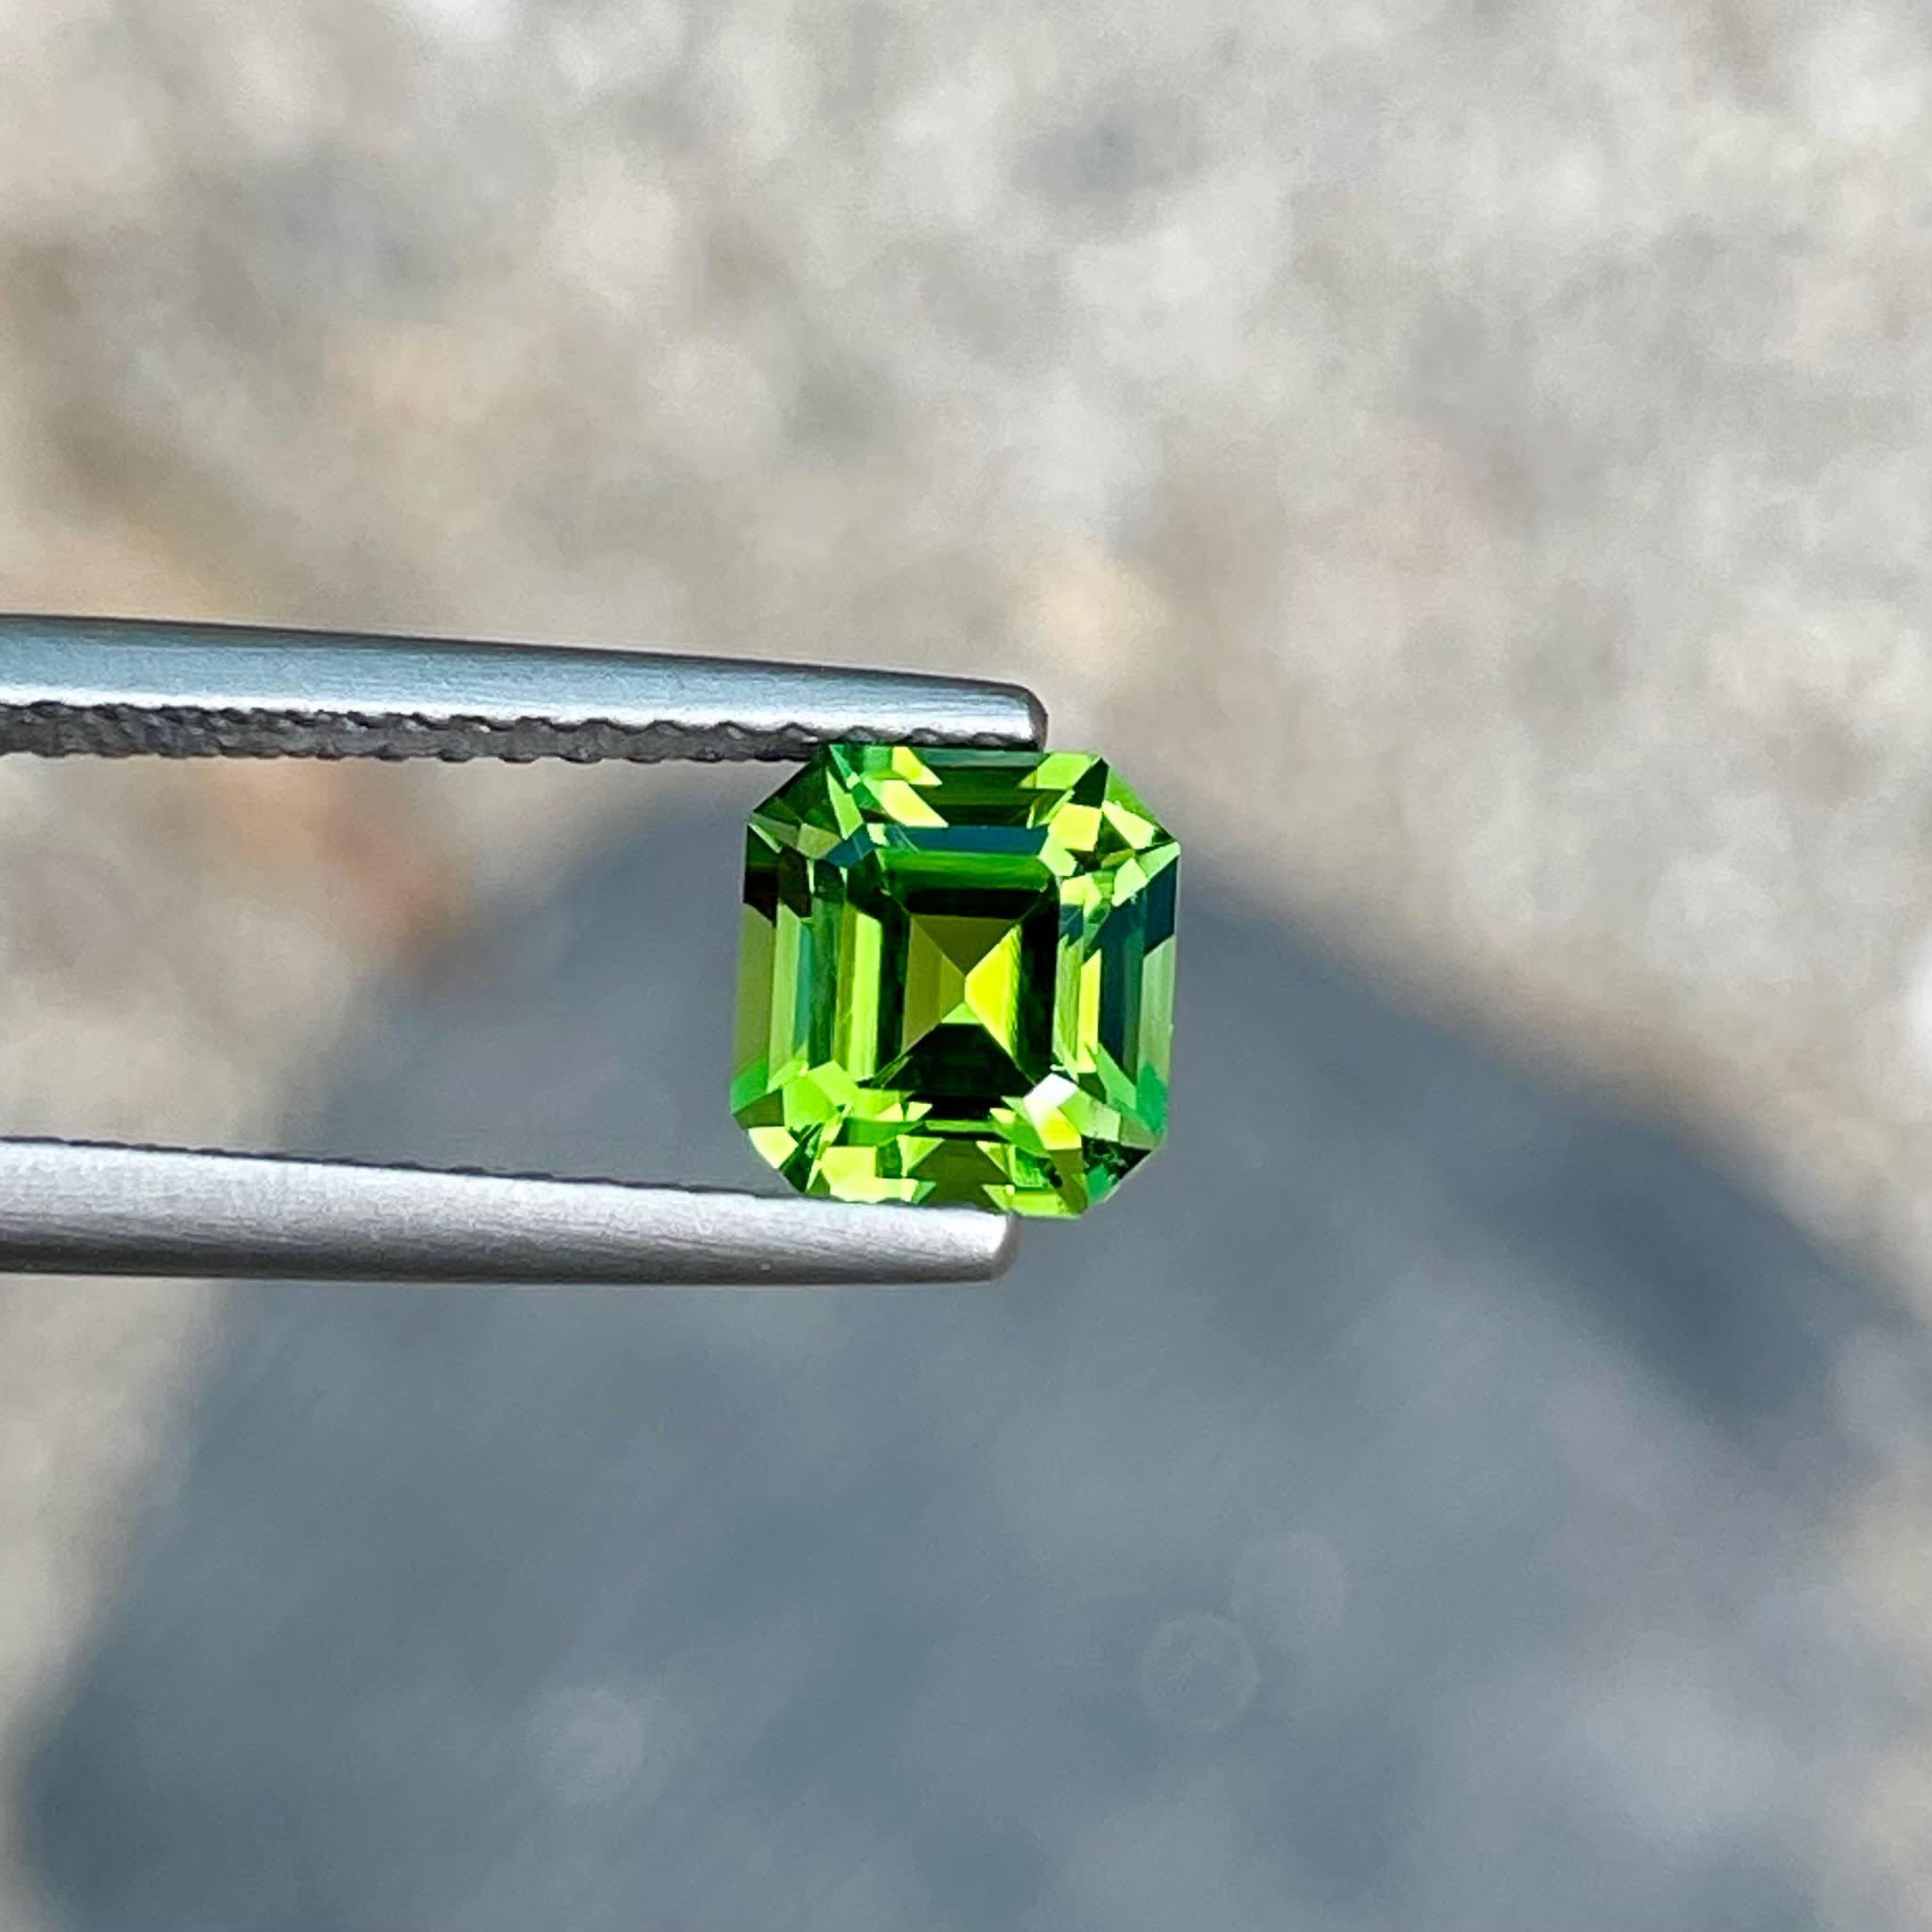 Weight 1.15 carats 
Dimensions 6.1x5.7x4.4 mm
Treatment none 
Origin Afghanistan 
Clarity eye clean 
Shape octagon 
Cut emerald 



The exquisite Green Tourmaline stone, boasting a weight of 1.15 carats, captivates with its stunning Emerald Cut,